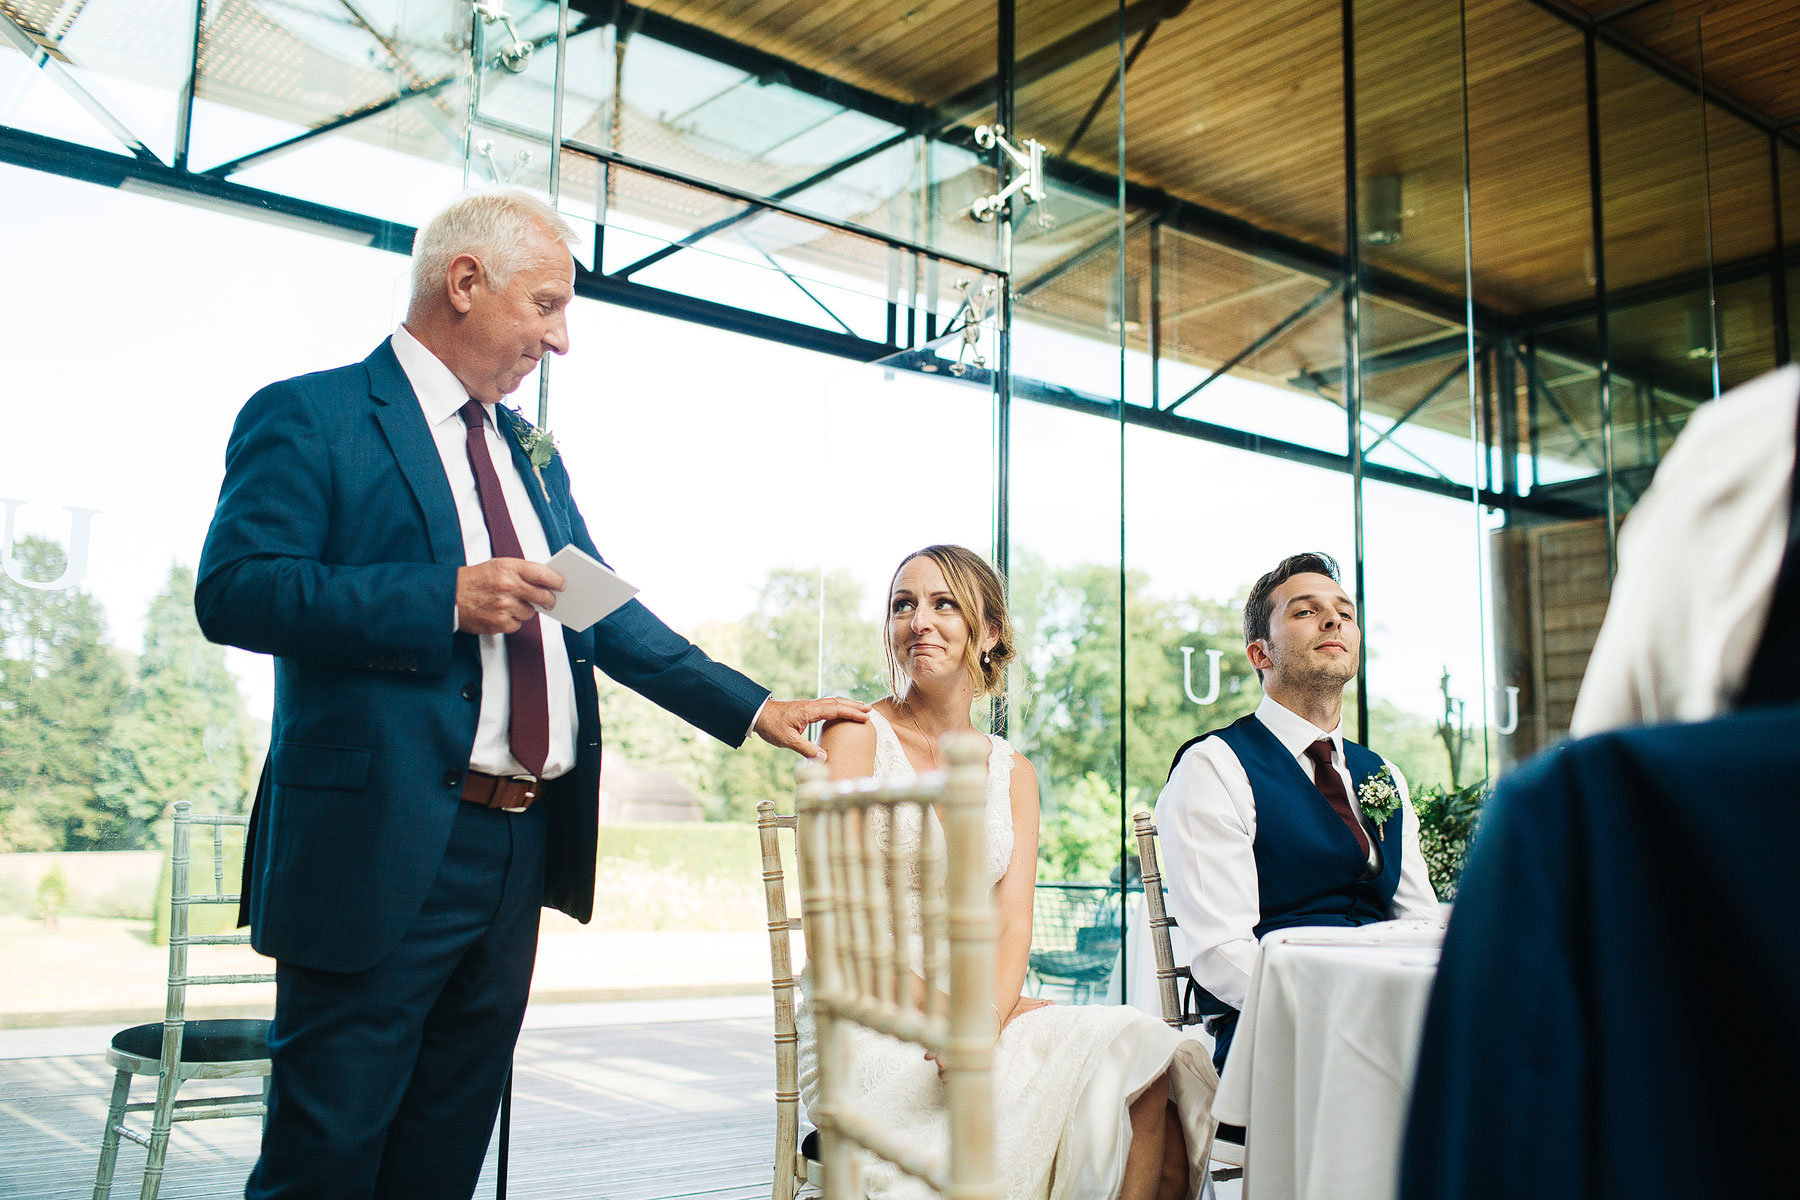 speeches at fun and quirky wedding venue